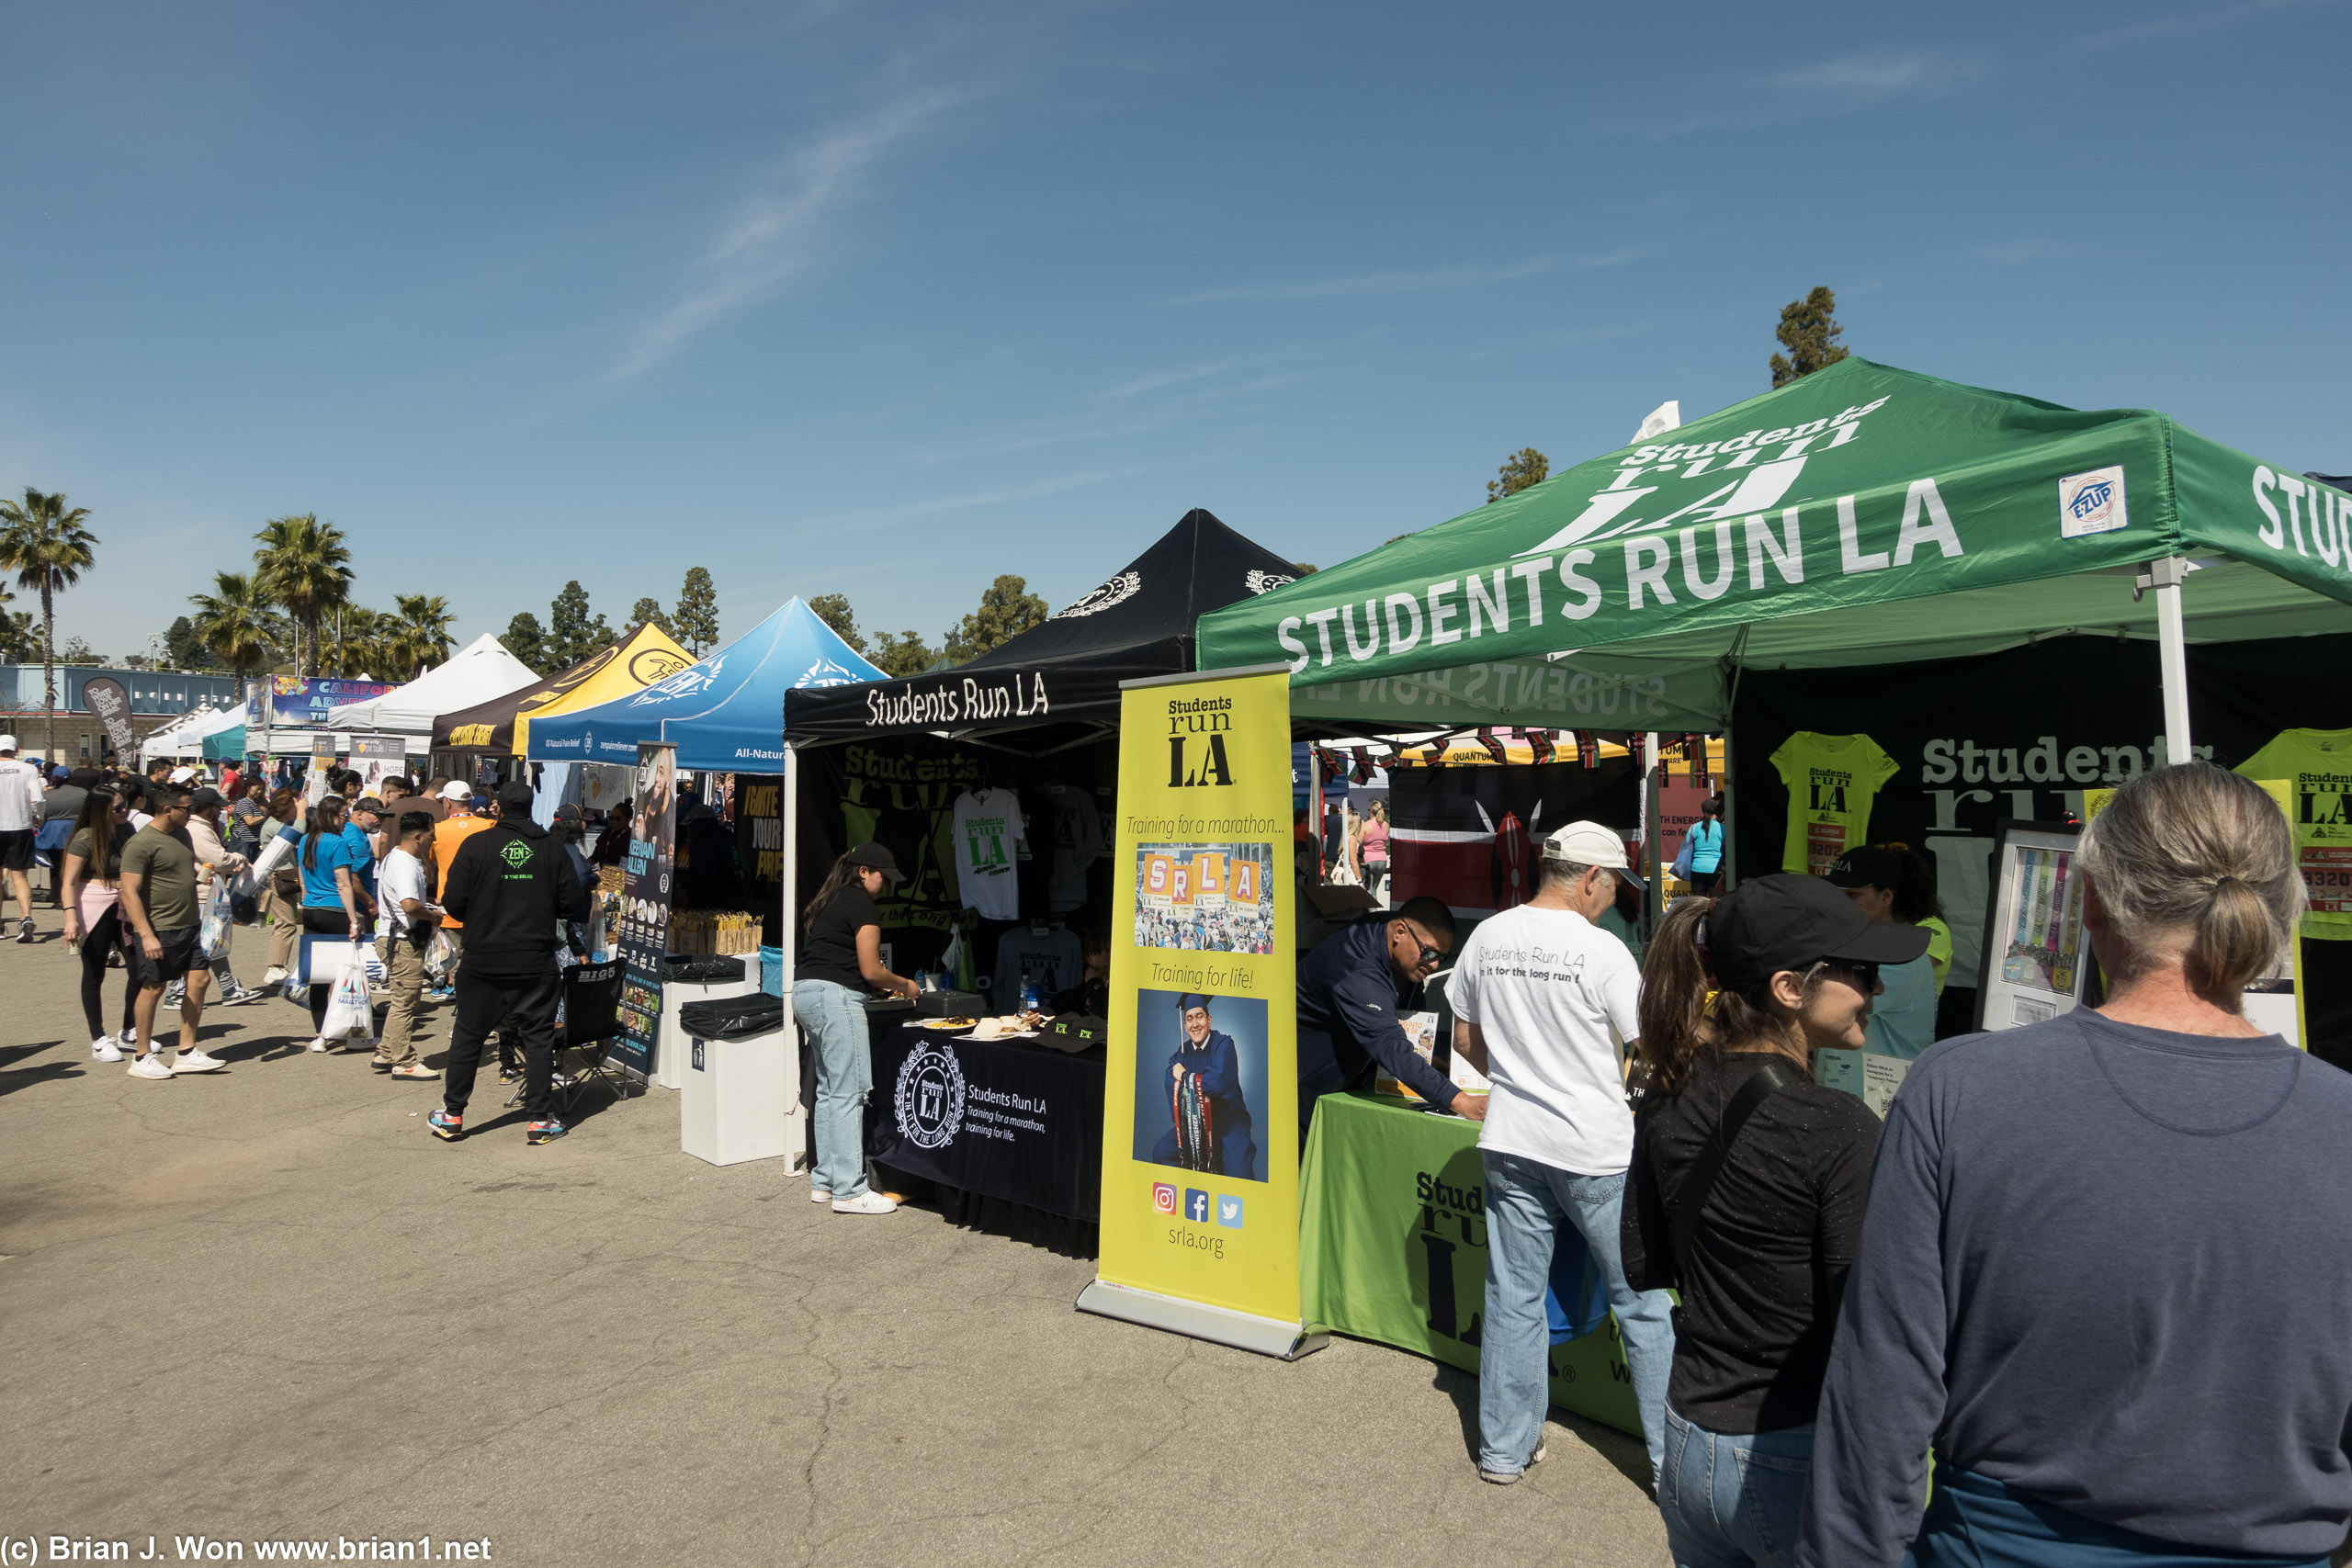 Students Run LA and other running groups in this area.